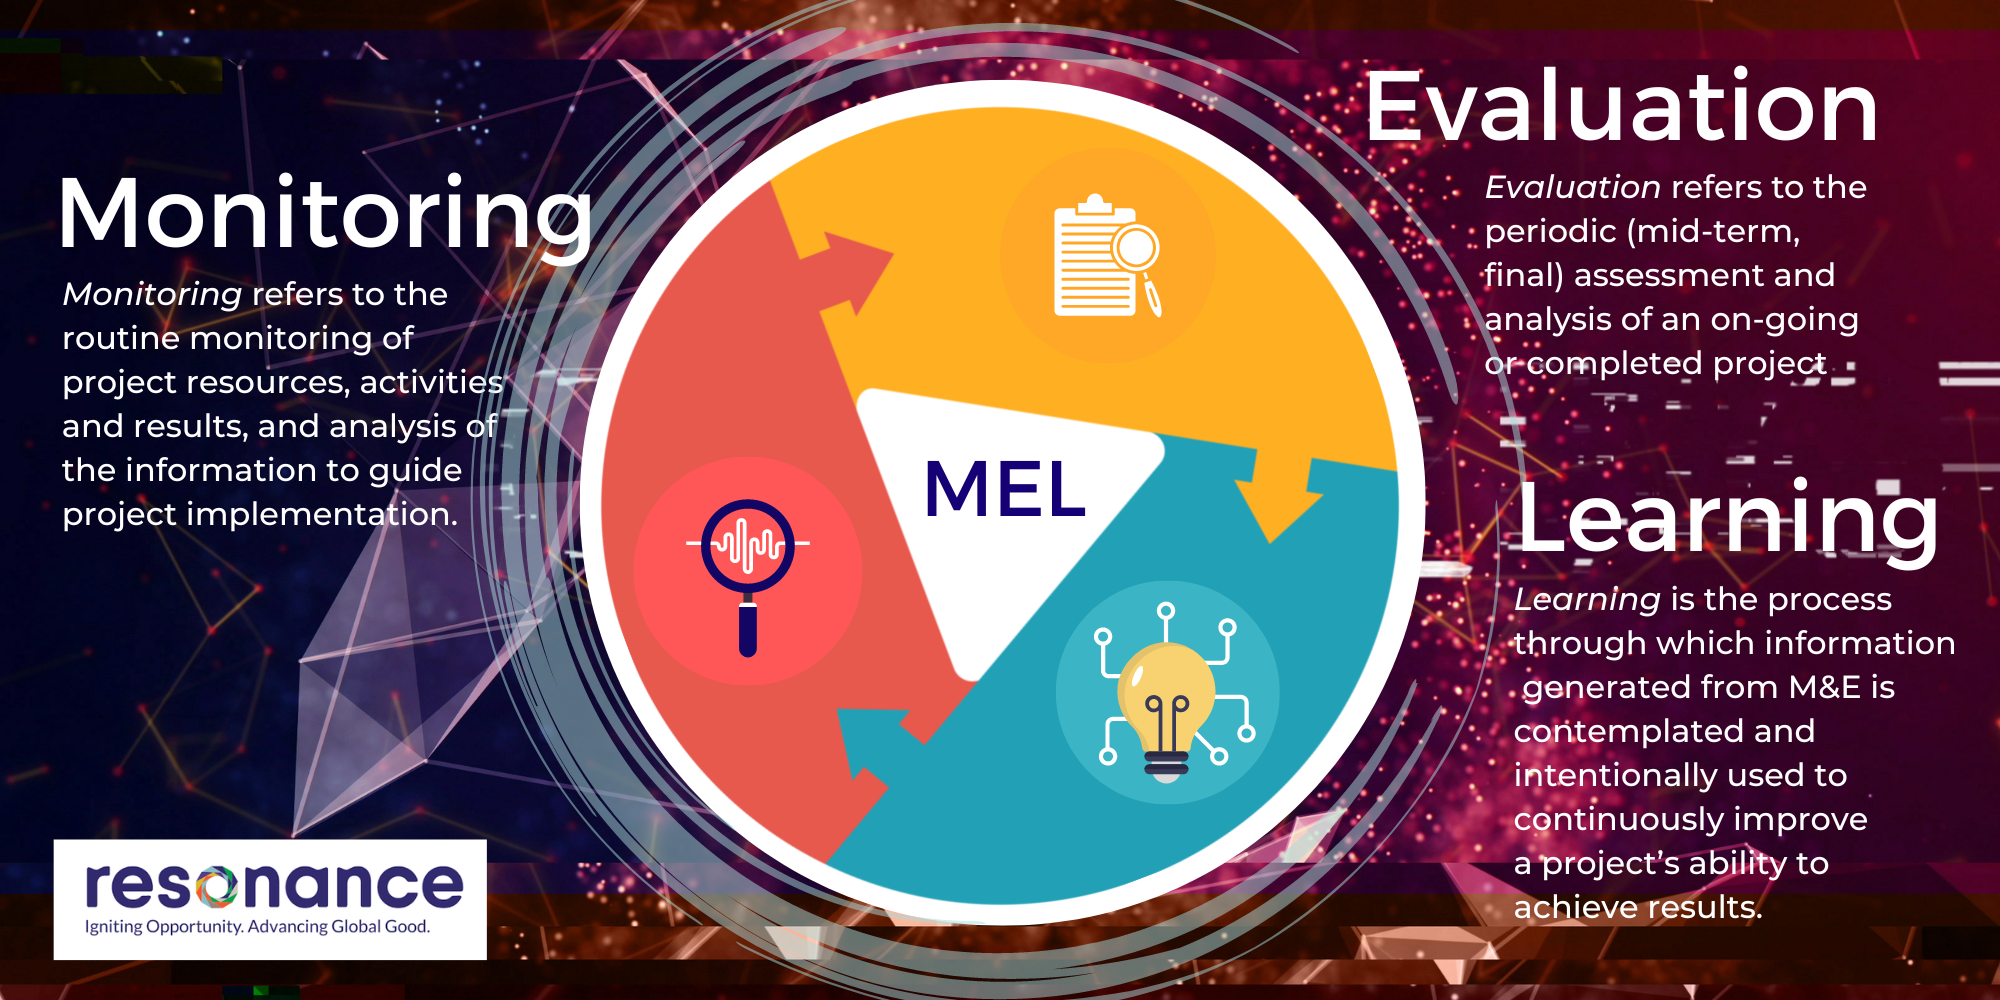 What is Monitoring, Evaluation, and Learning (MEL)?